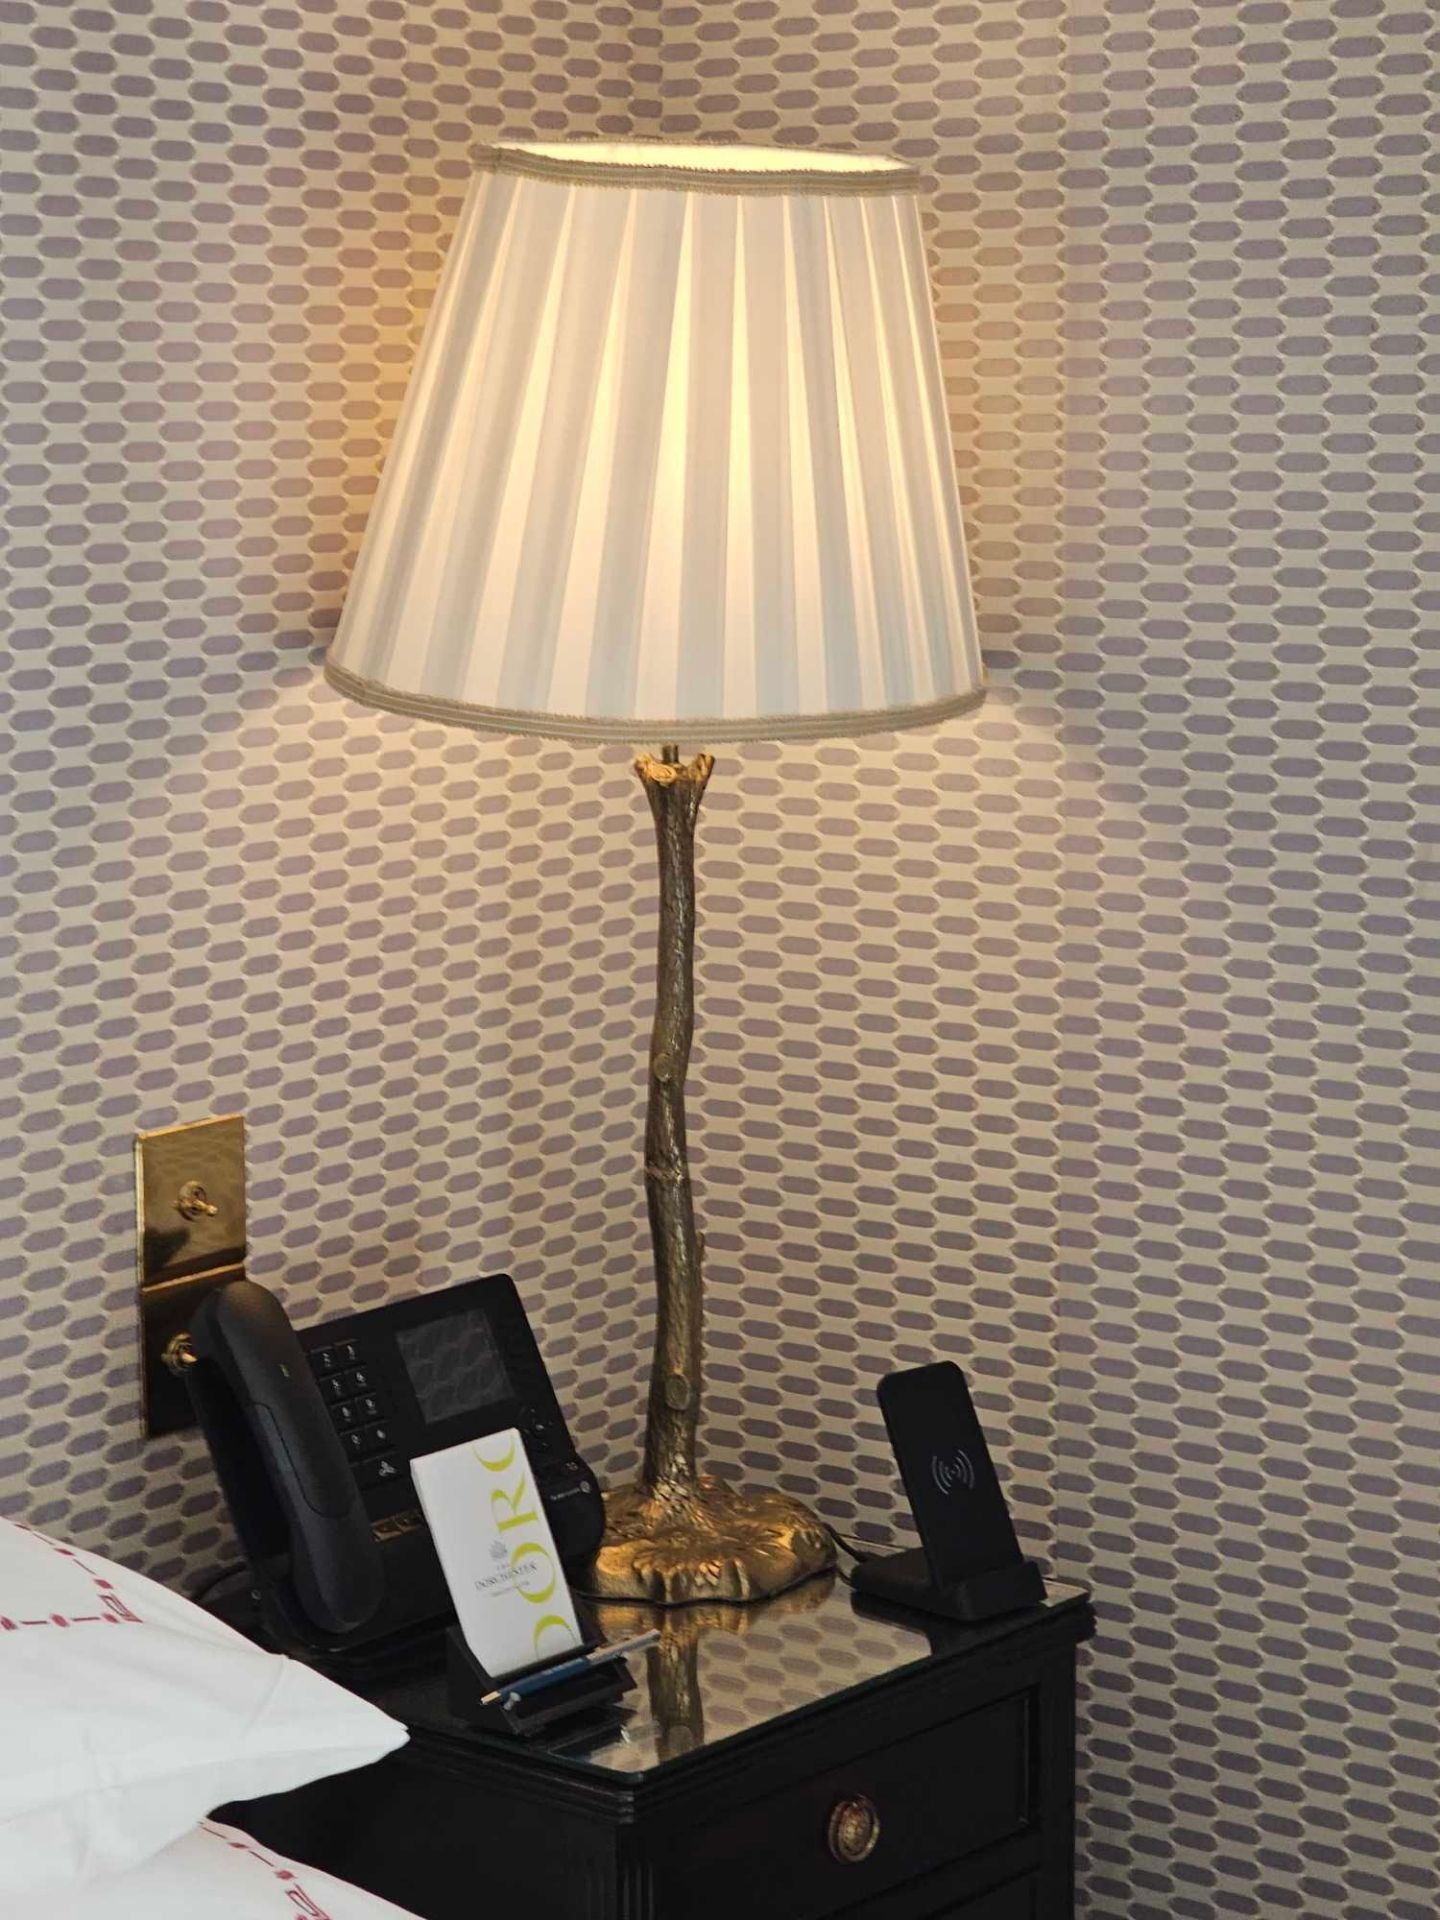 A Pair Of Truro Twig Table Lamp Inspired From A Mid-Century French Design Organic Flowing Stem - Image 3 of 3